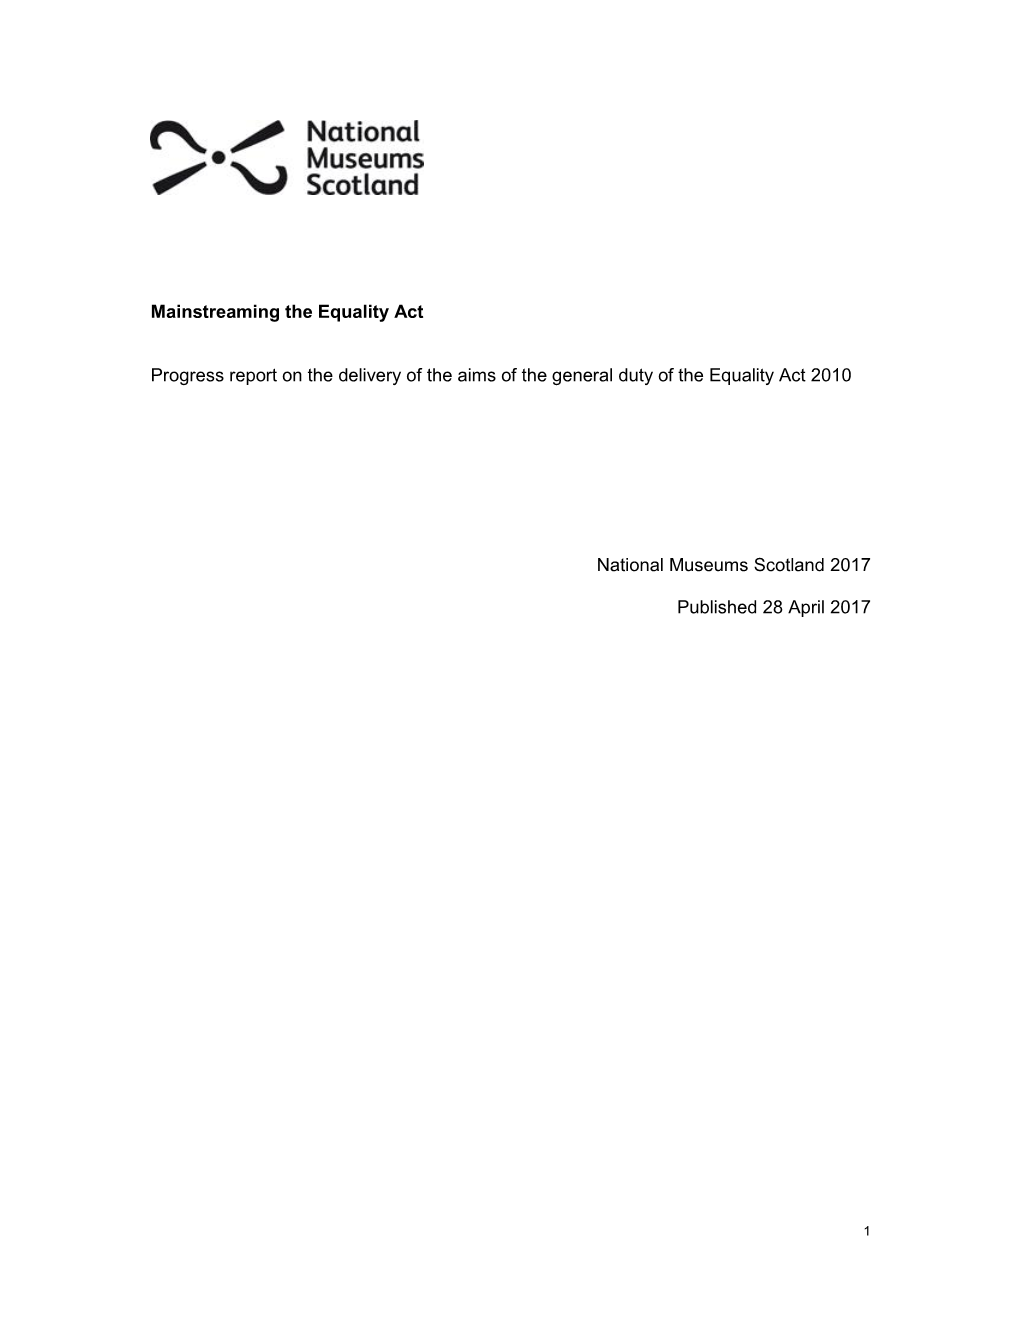 Mainstreaming the Equality Act Progress Report on the Delivery of The